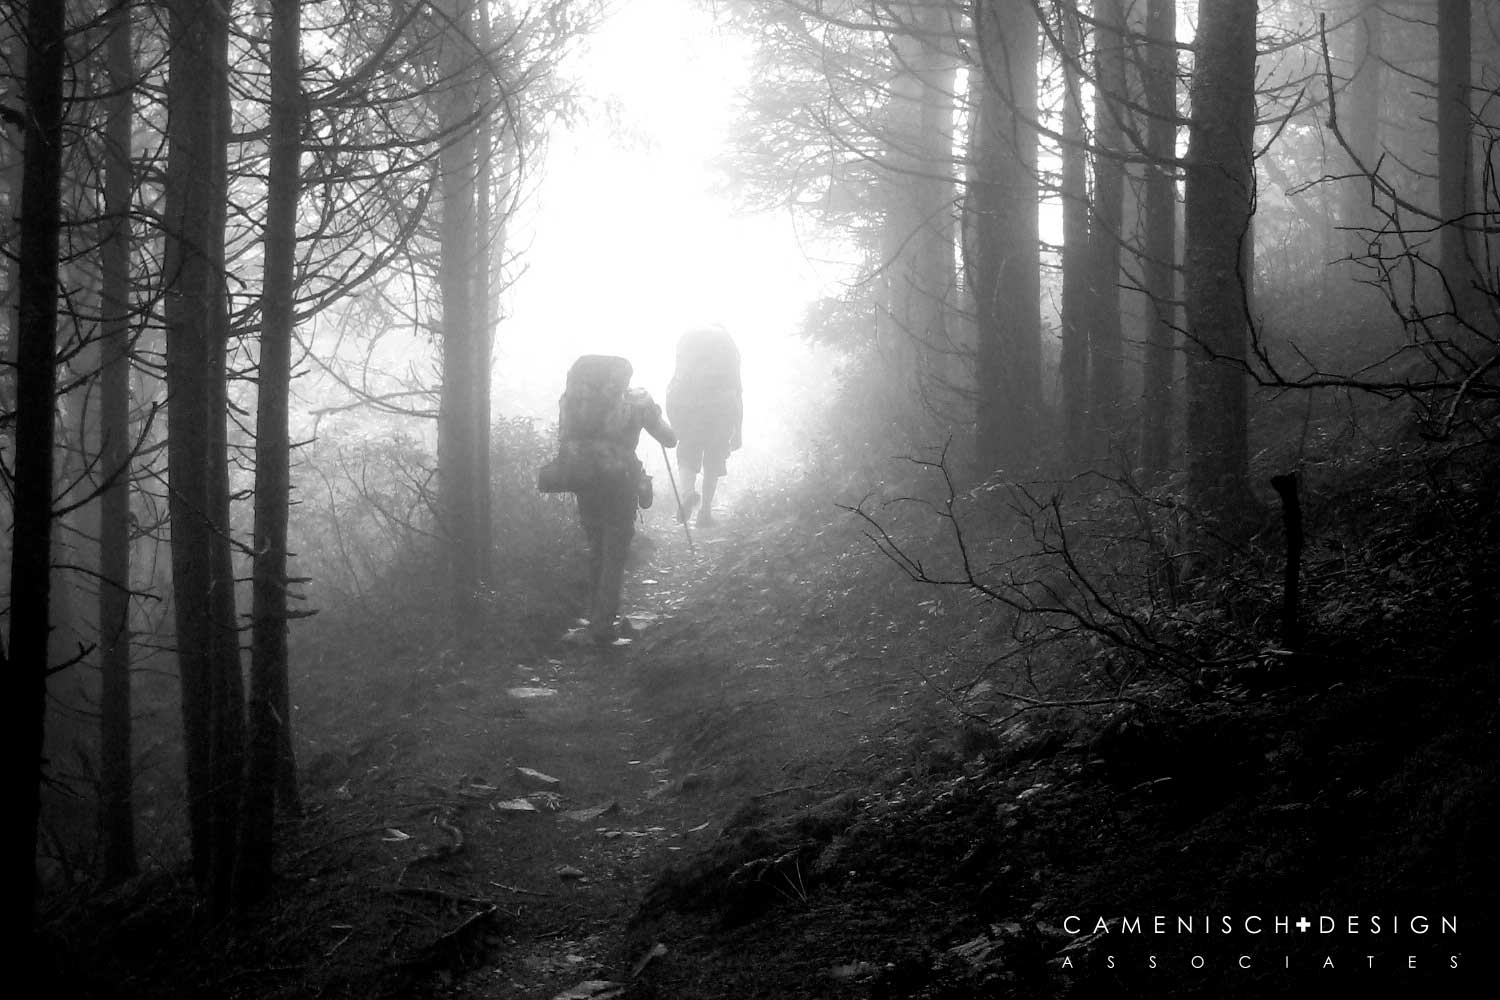 Foggy Trail Nature Photography - By Aaron Camenisch